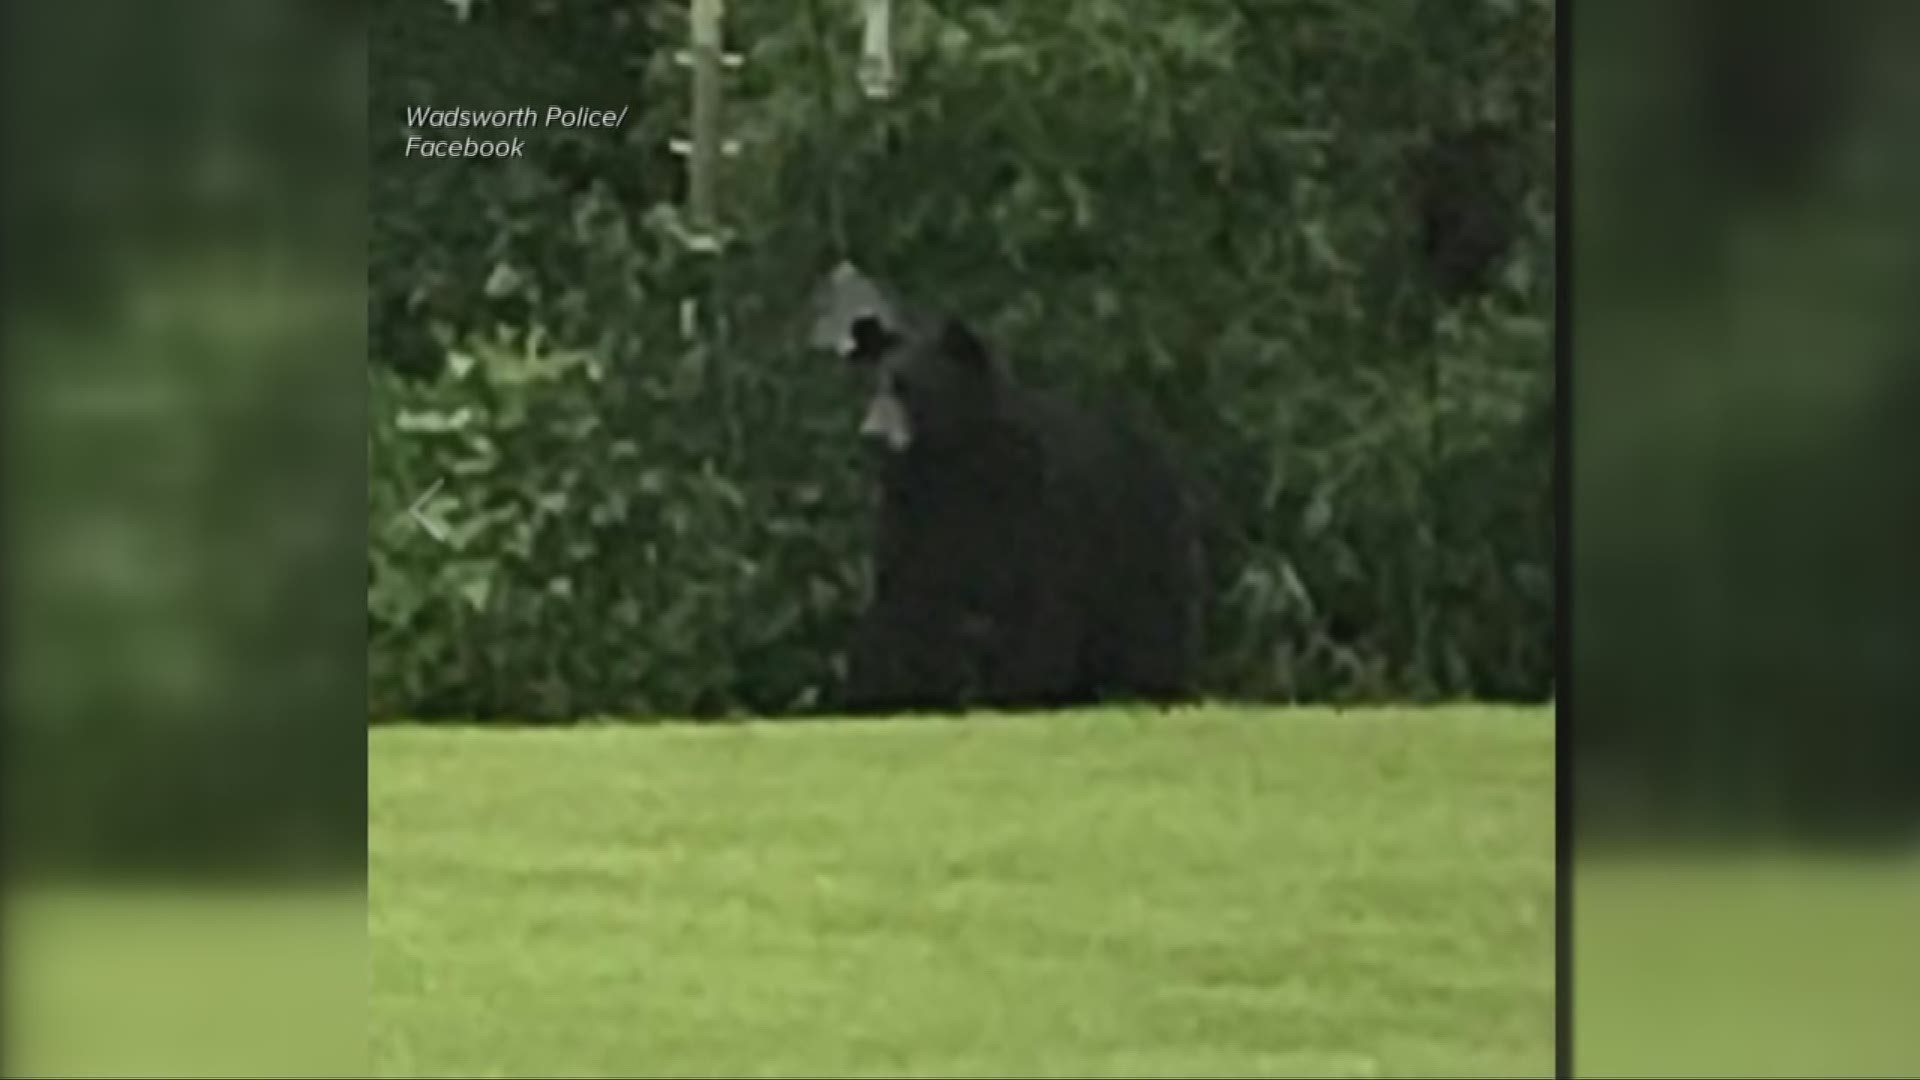 Sighting of black bear in Wadsworth and Norton